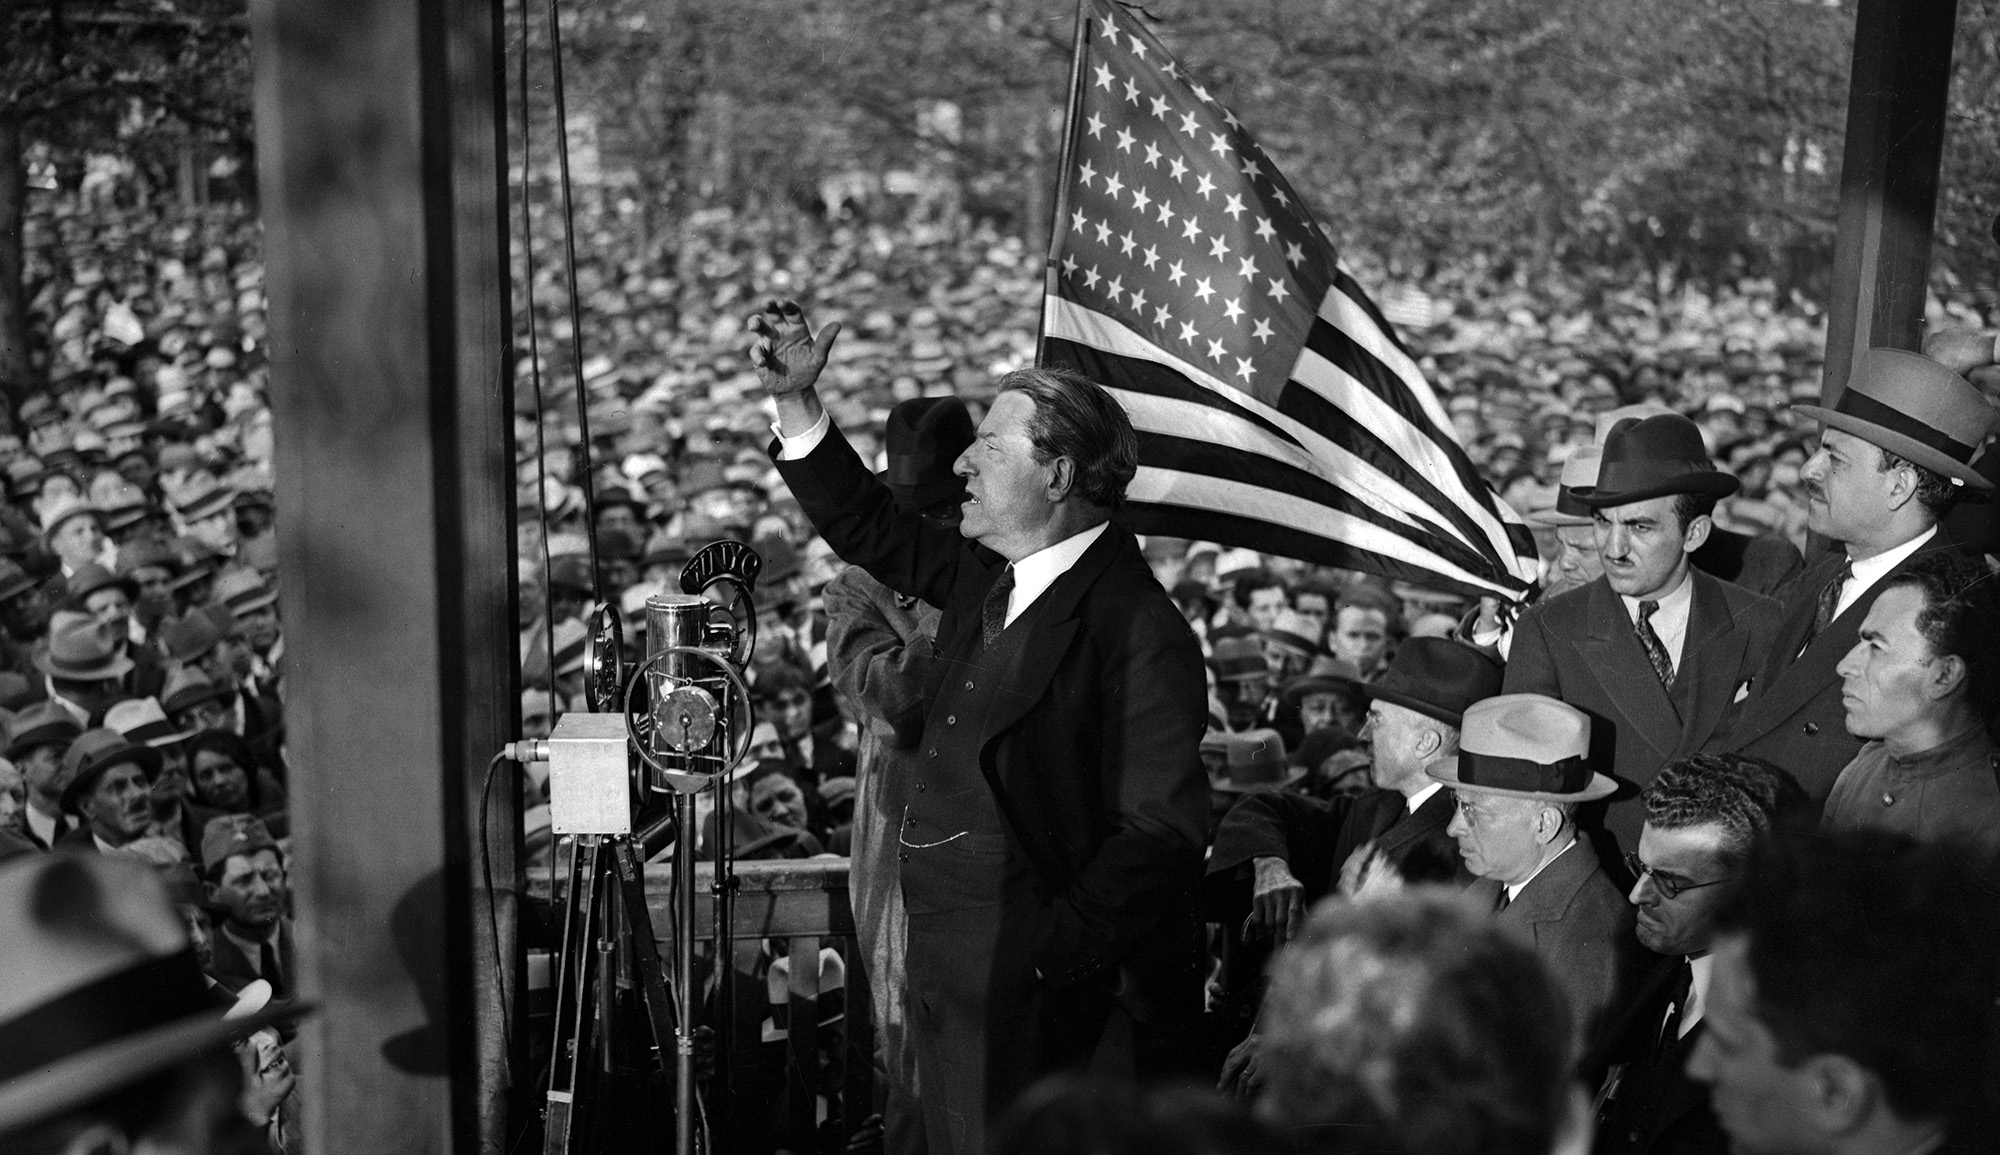 
Stephen S. Wise, a rabbi and American Zionist, addressing a throng in Battery Park, New York. Getty/Bettmann.







